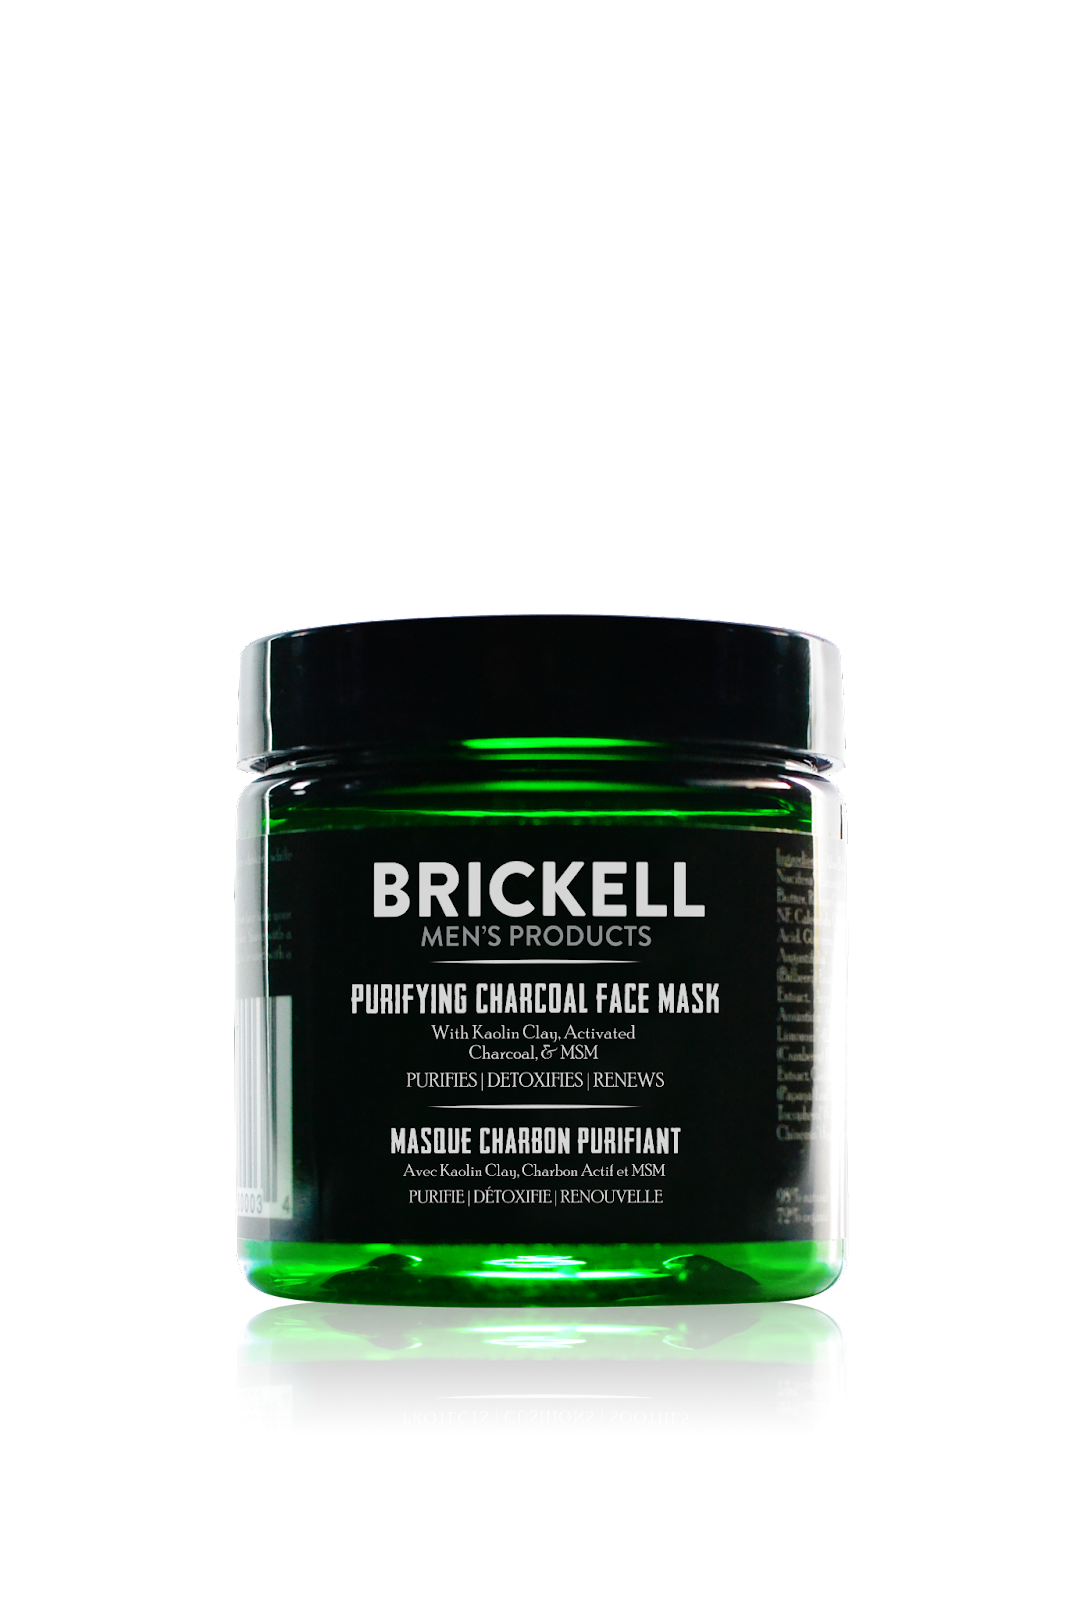 Brickell Men’s Products Purifying Charcoal Face Mask